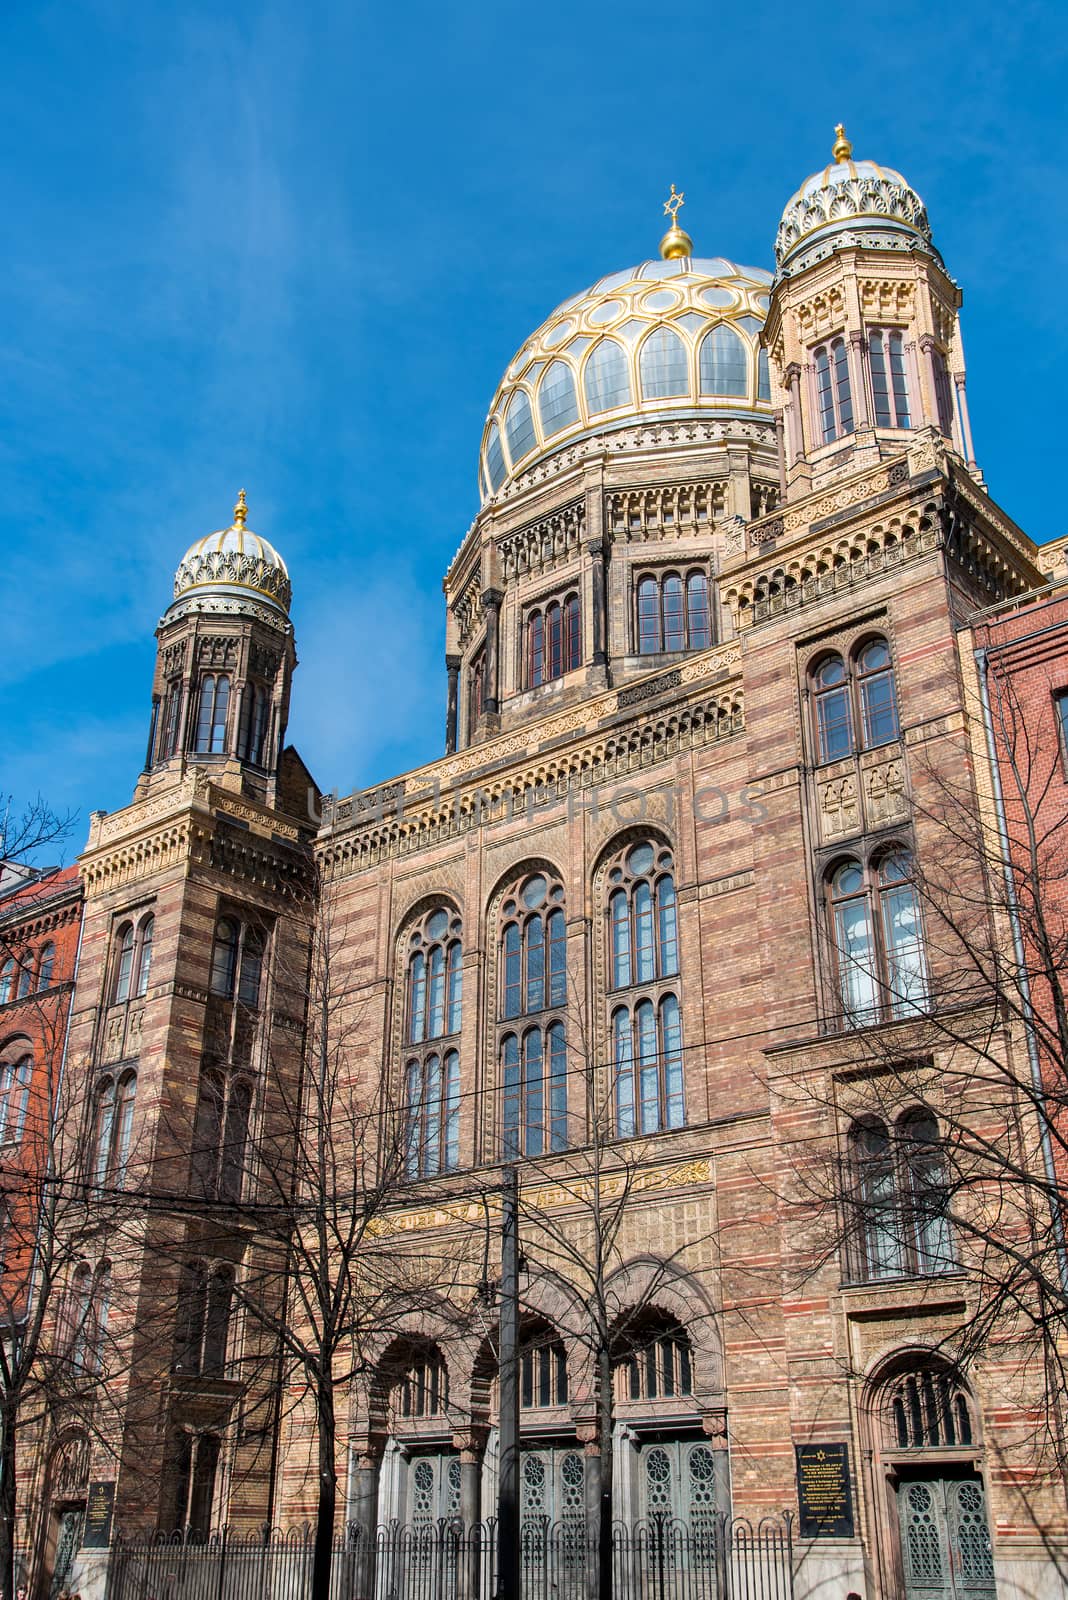 The beautiful New Synagogue in Berlin, Germany